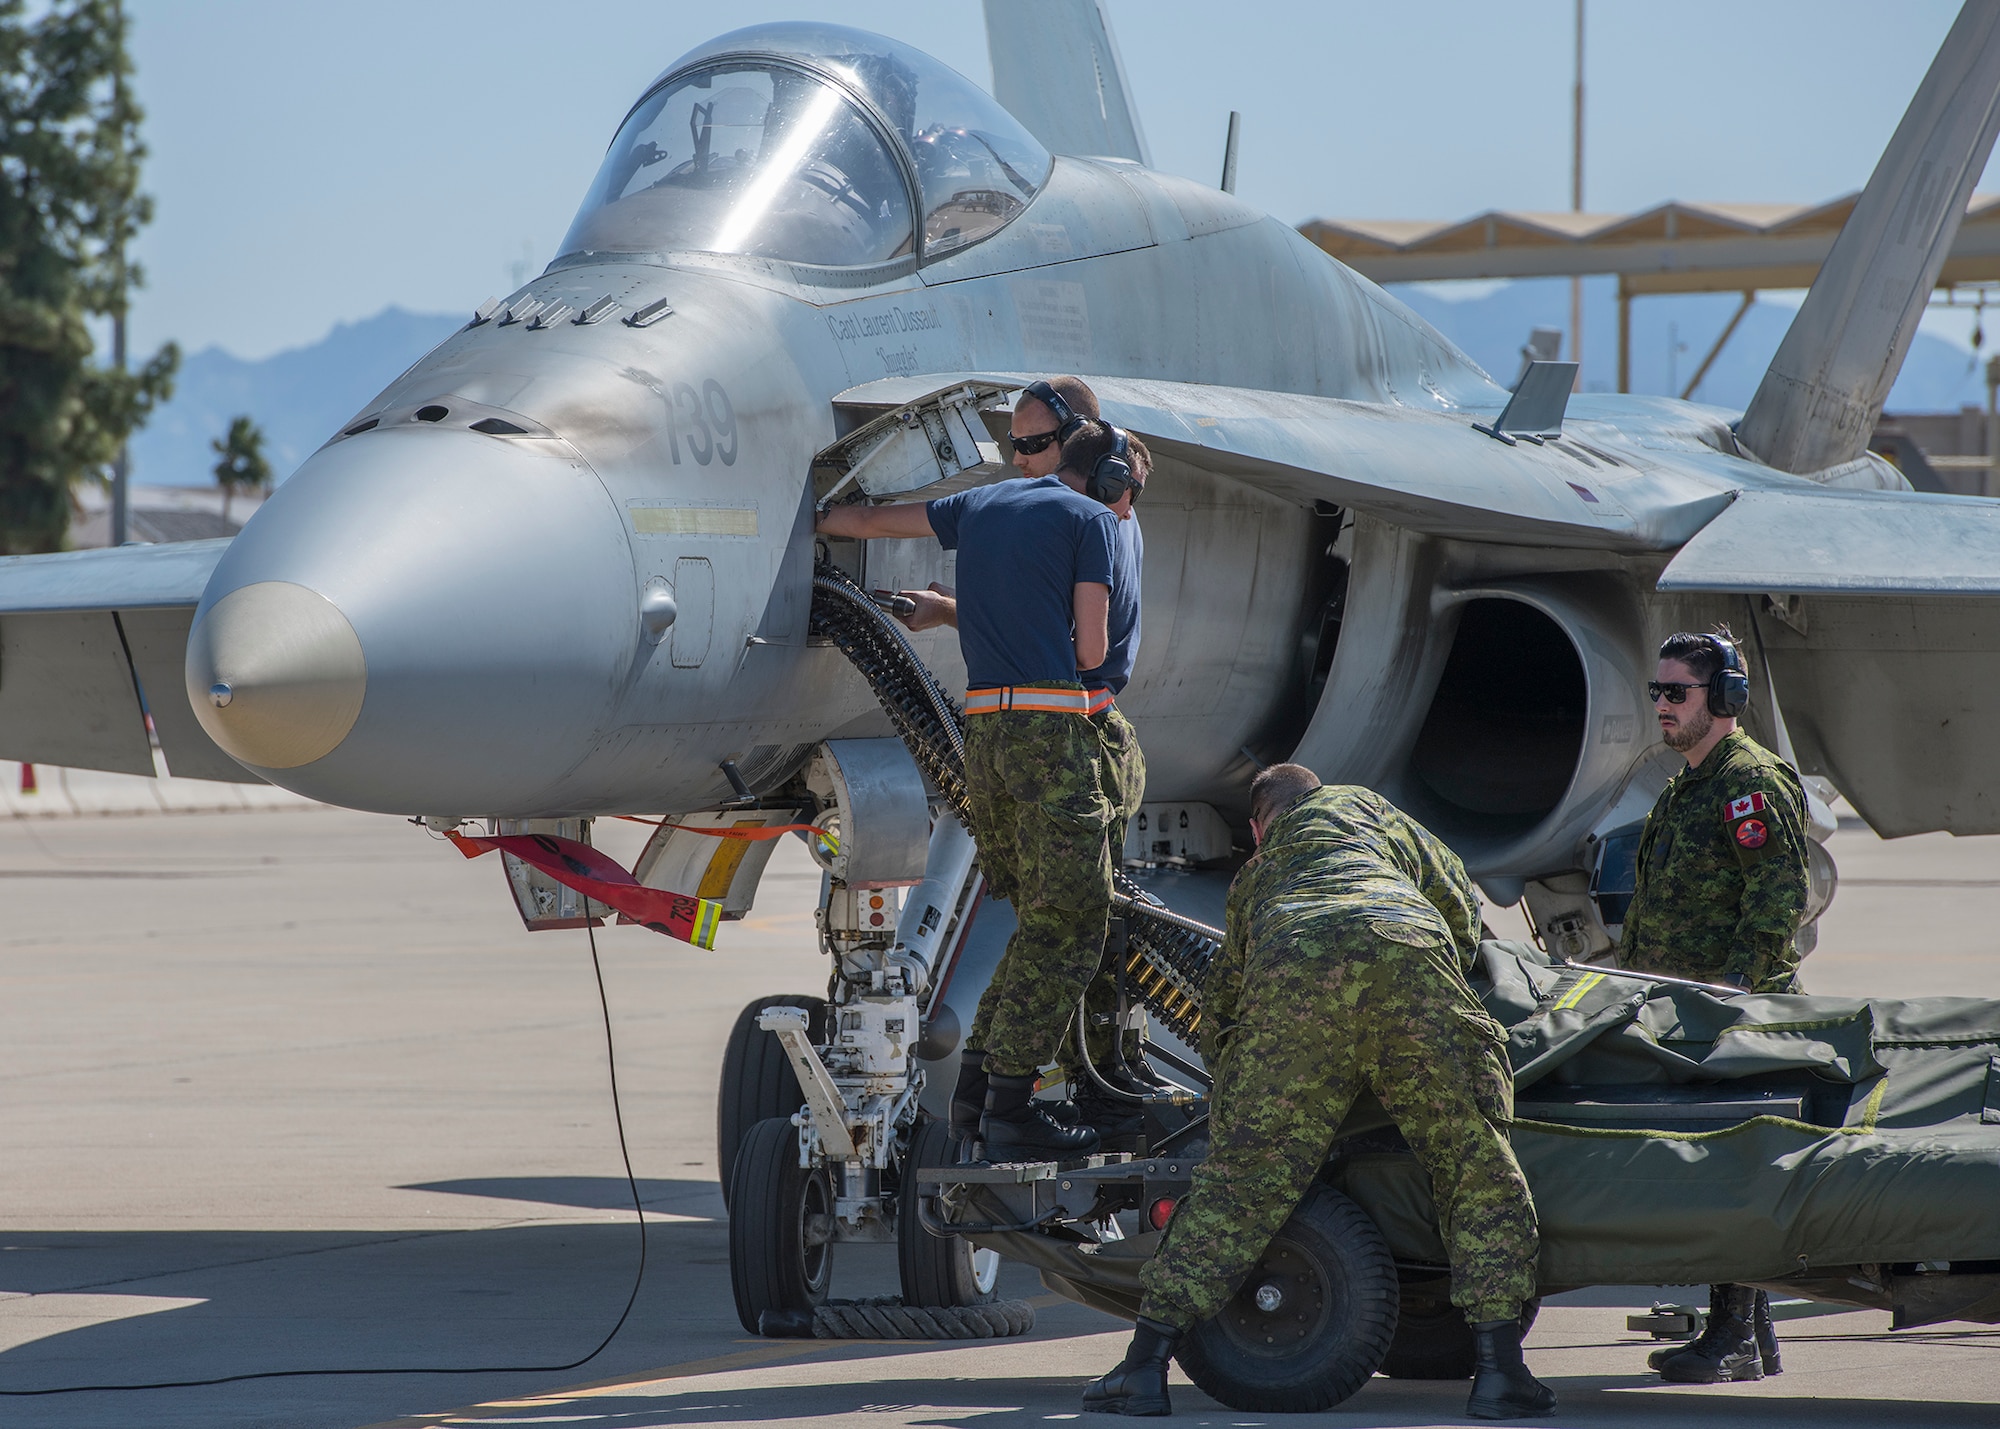 Royal Canadian air force maintainers, assigned to the 433rd Tactical Fighter Squadron in Canadian Forces Base Bagotville, Quebec, Canada, load ammunition onto a CF-18 Hornet, Feb. 25, 2020, at Luke Air Force Base, Ariz.